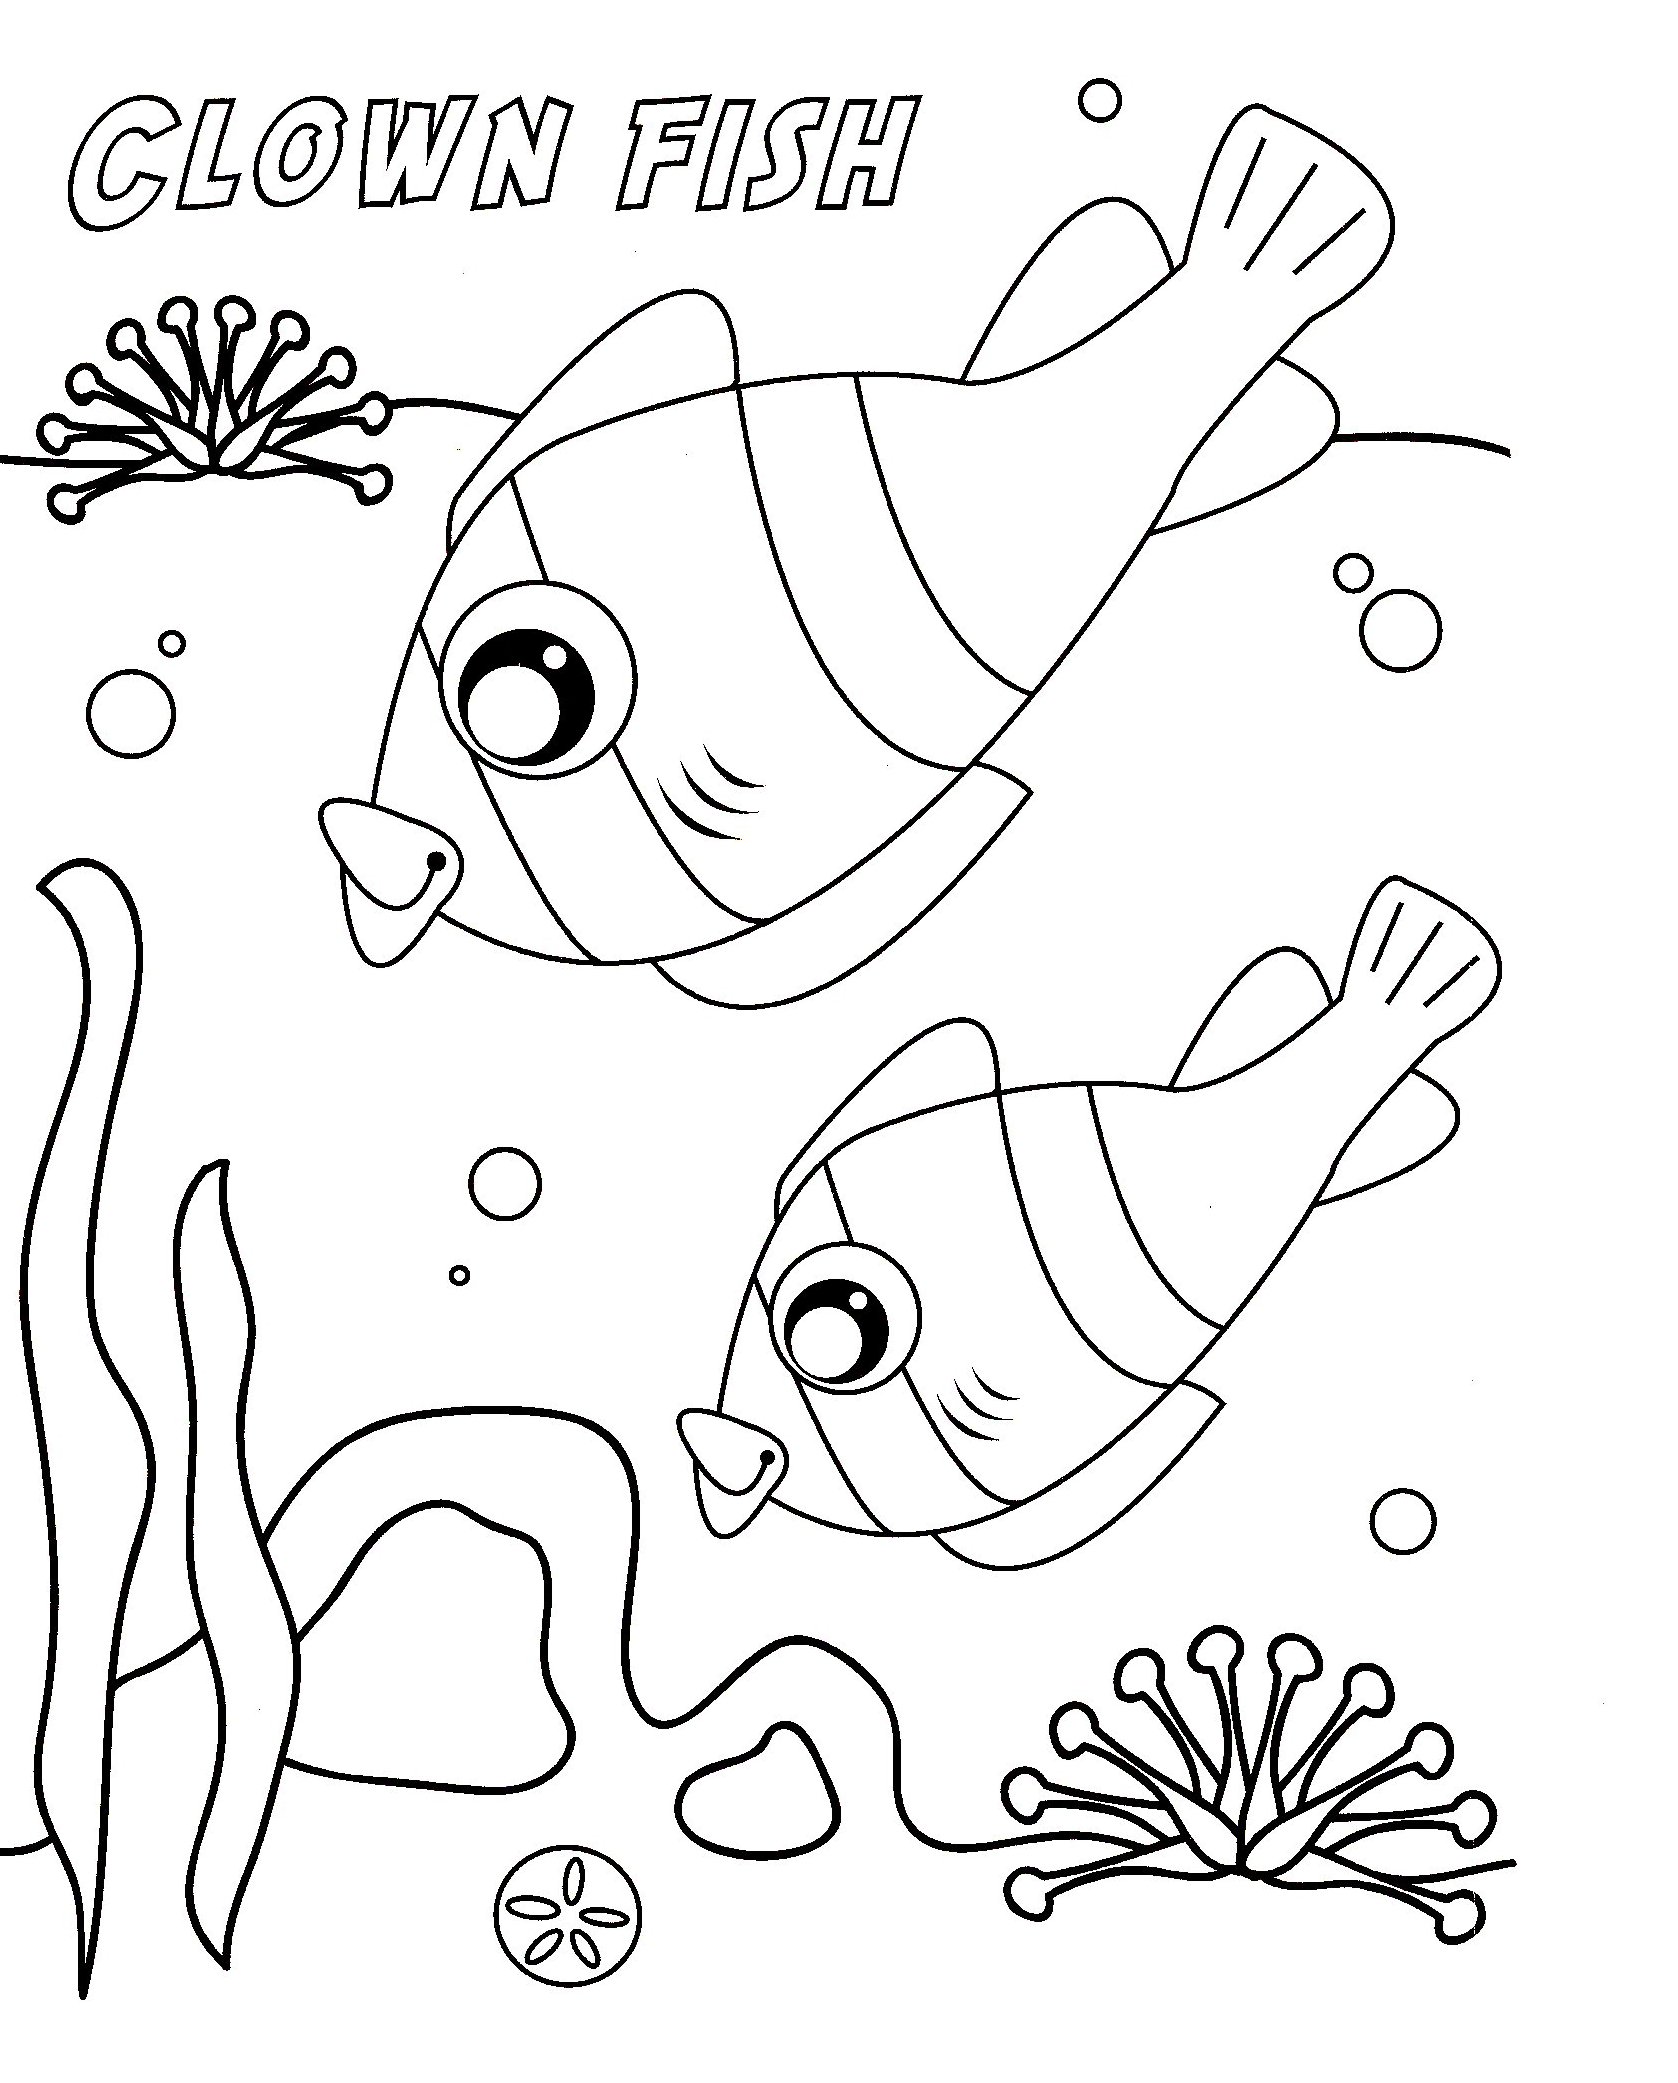 Sea life coloring pages to download and print for free